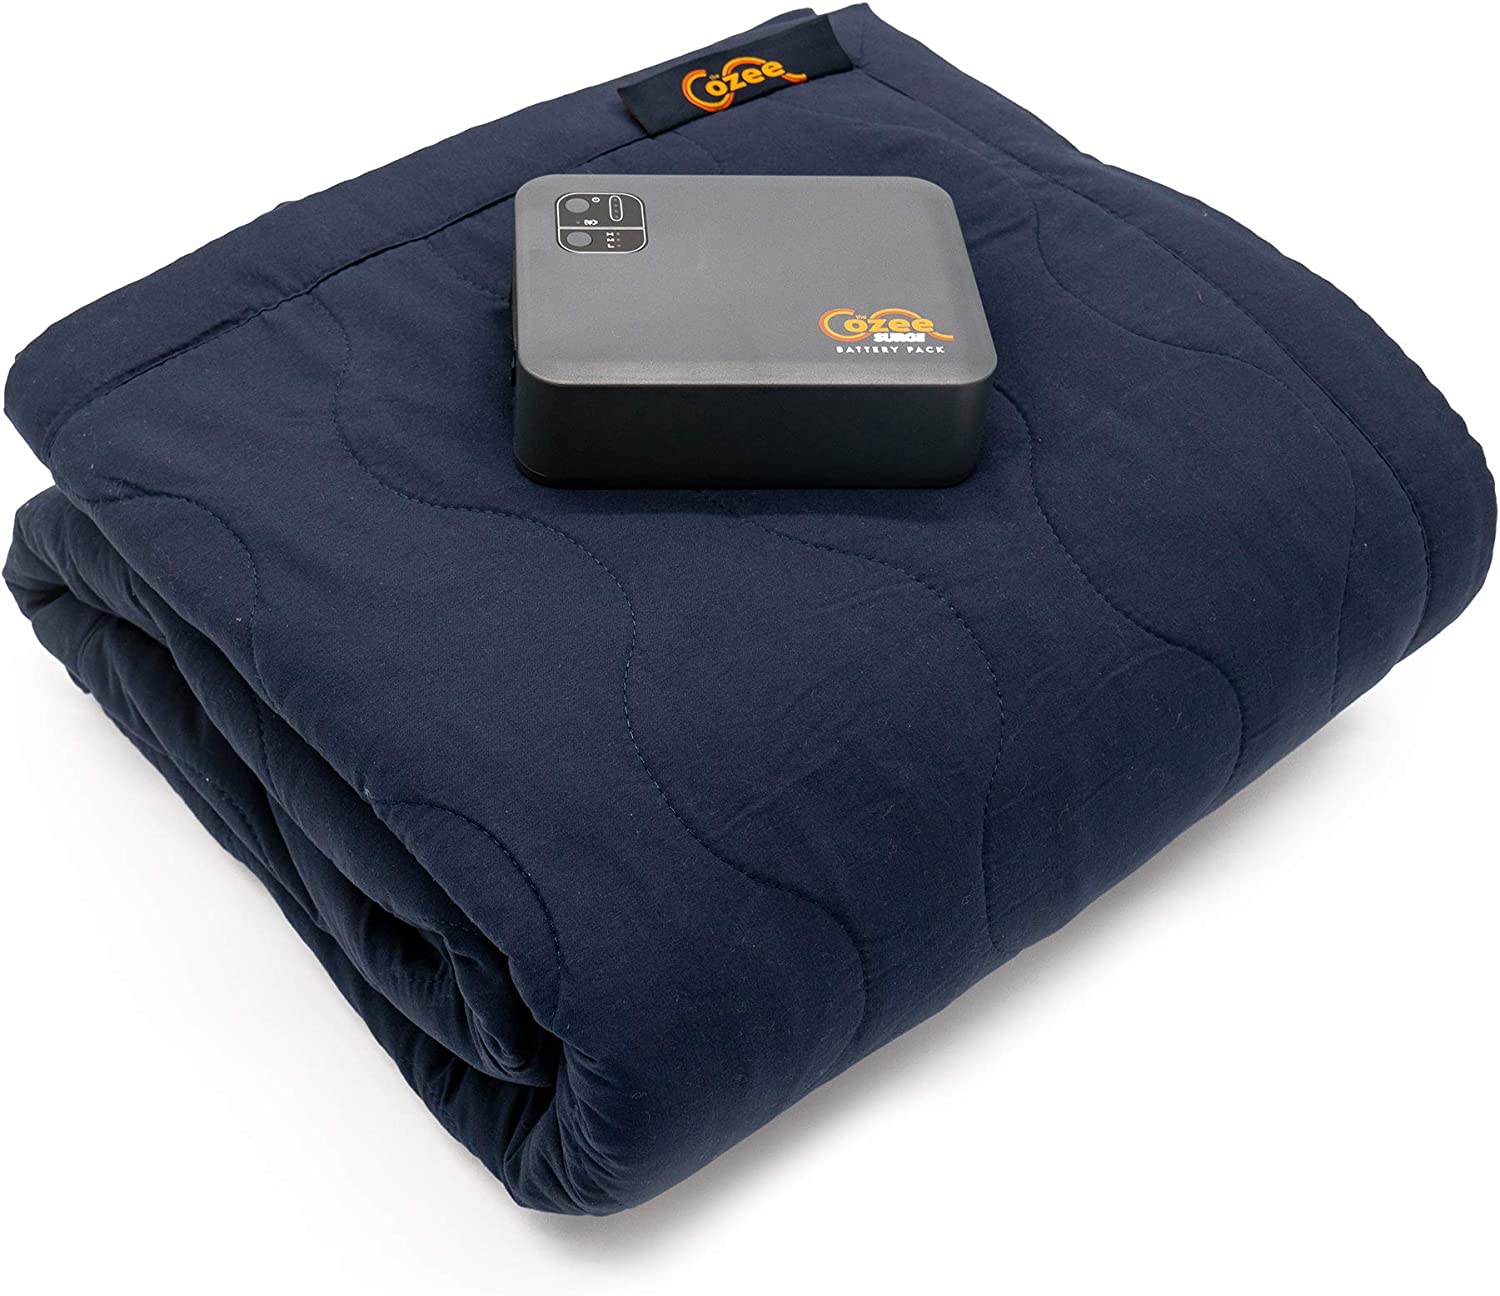 Cozee Cordless Heated Blanket Best Battery operated Electric Blanket